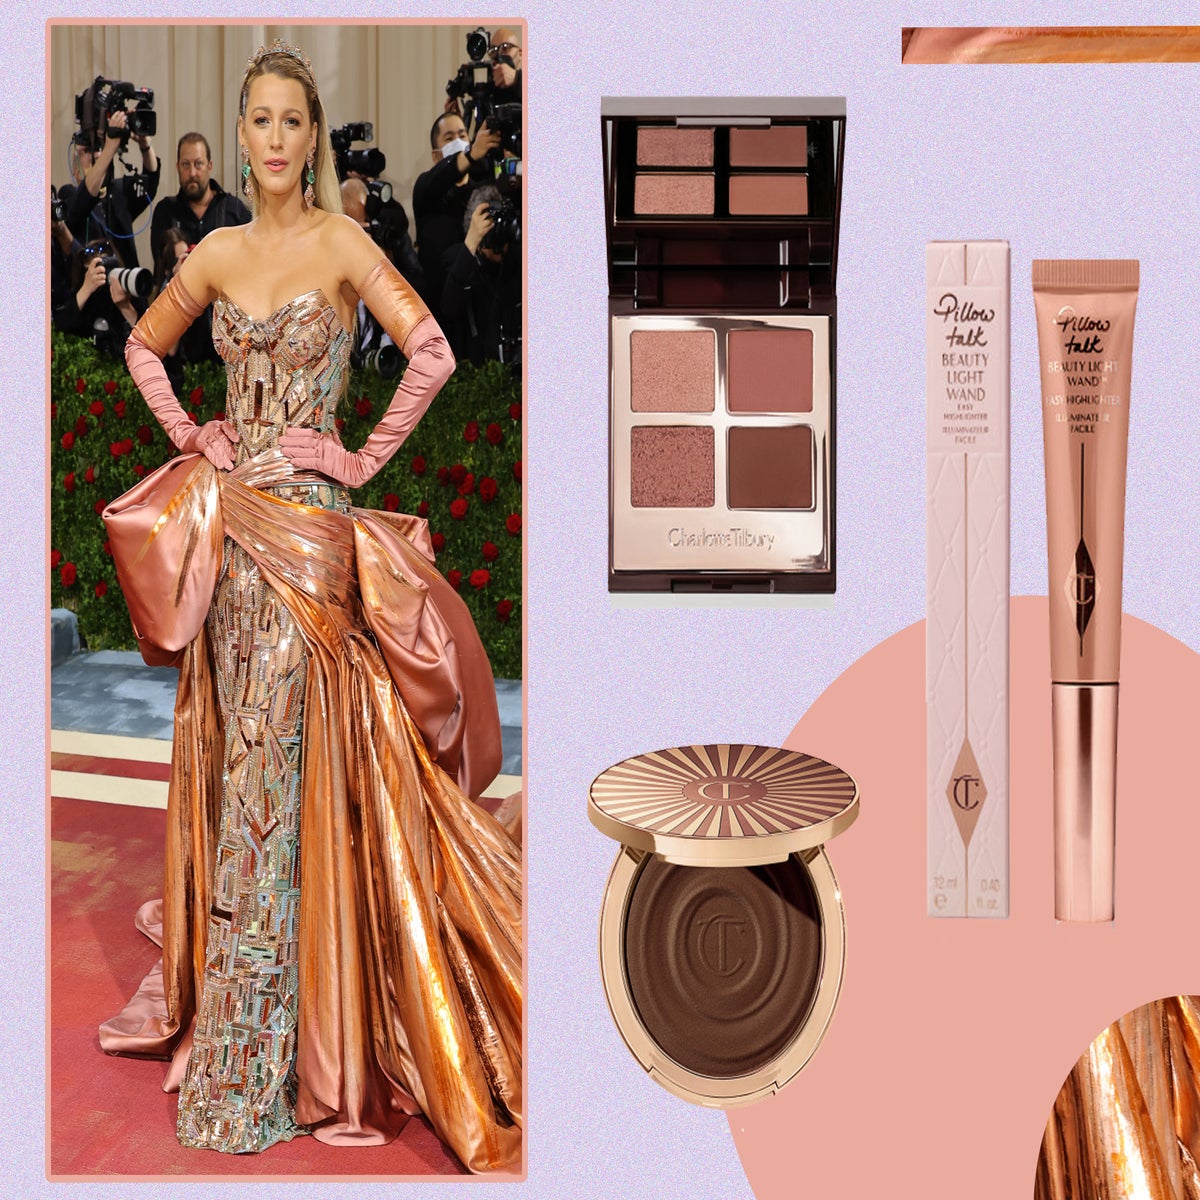 Met Gala 2022: Blake Lively Debuted a New Charlotte Tilbury Bronzer -  Photos